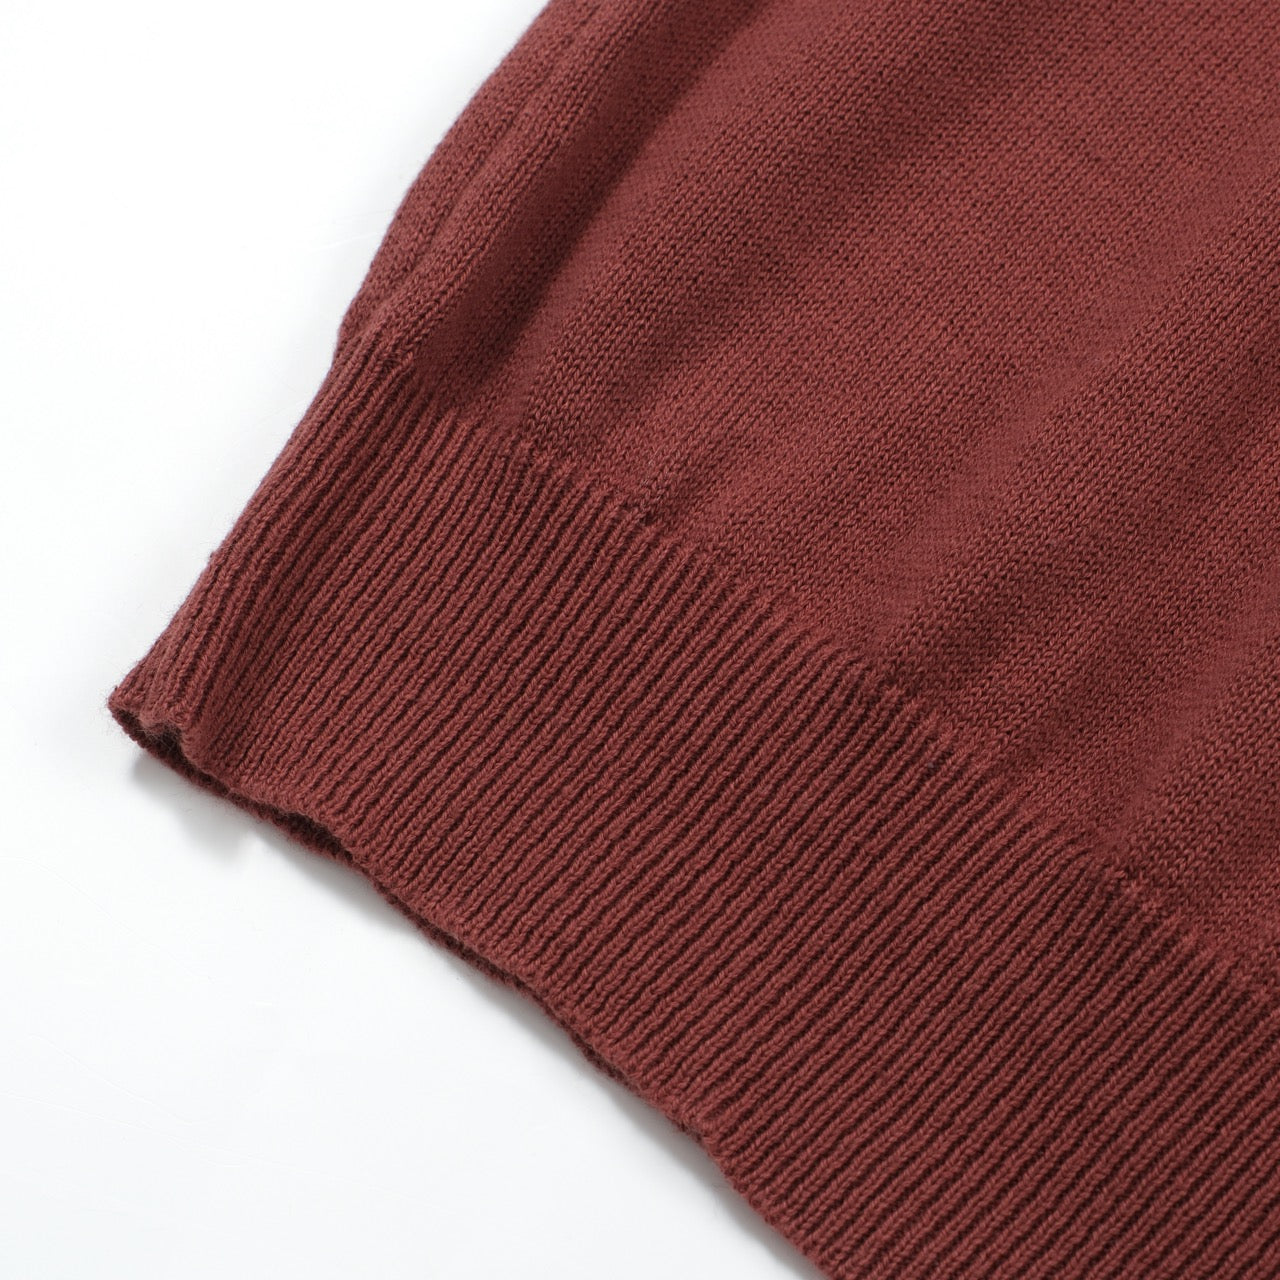 OXKNIT Men Vintage Clothing 1960s Mod Style Casual Red Brown Knitted Retro Polo Single Pocket